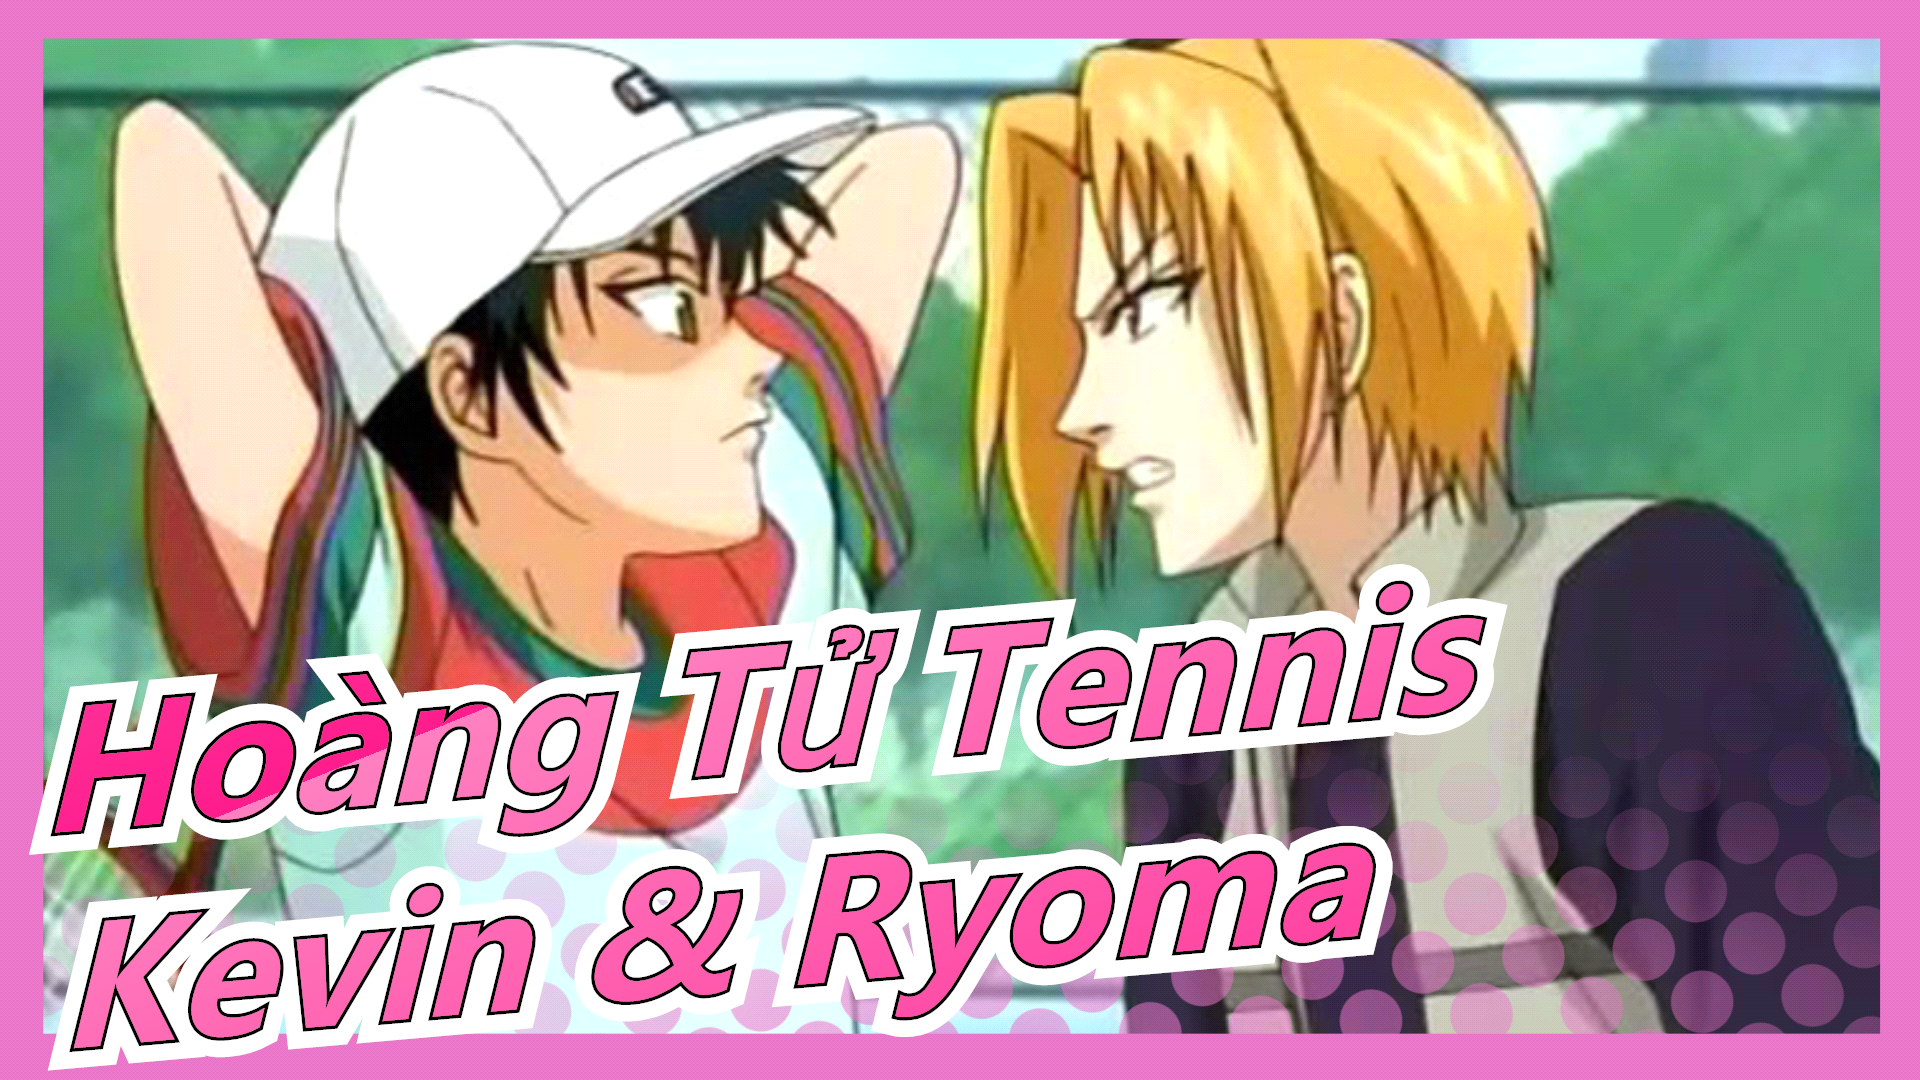 The Prince of Tennis English Dubbed Episodes Out! - TechNadu